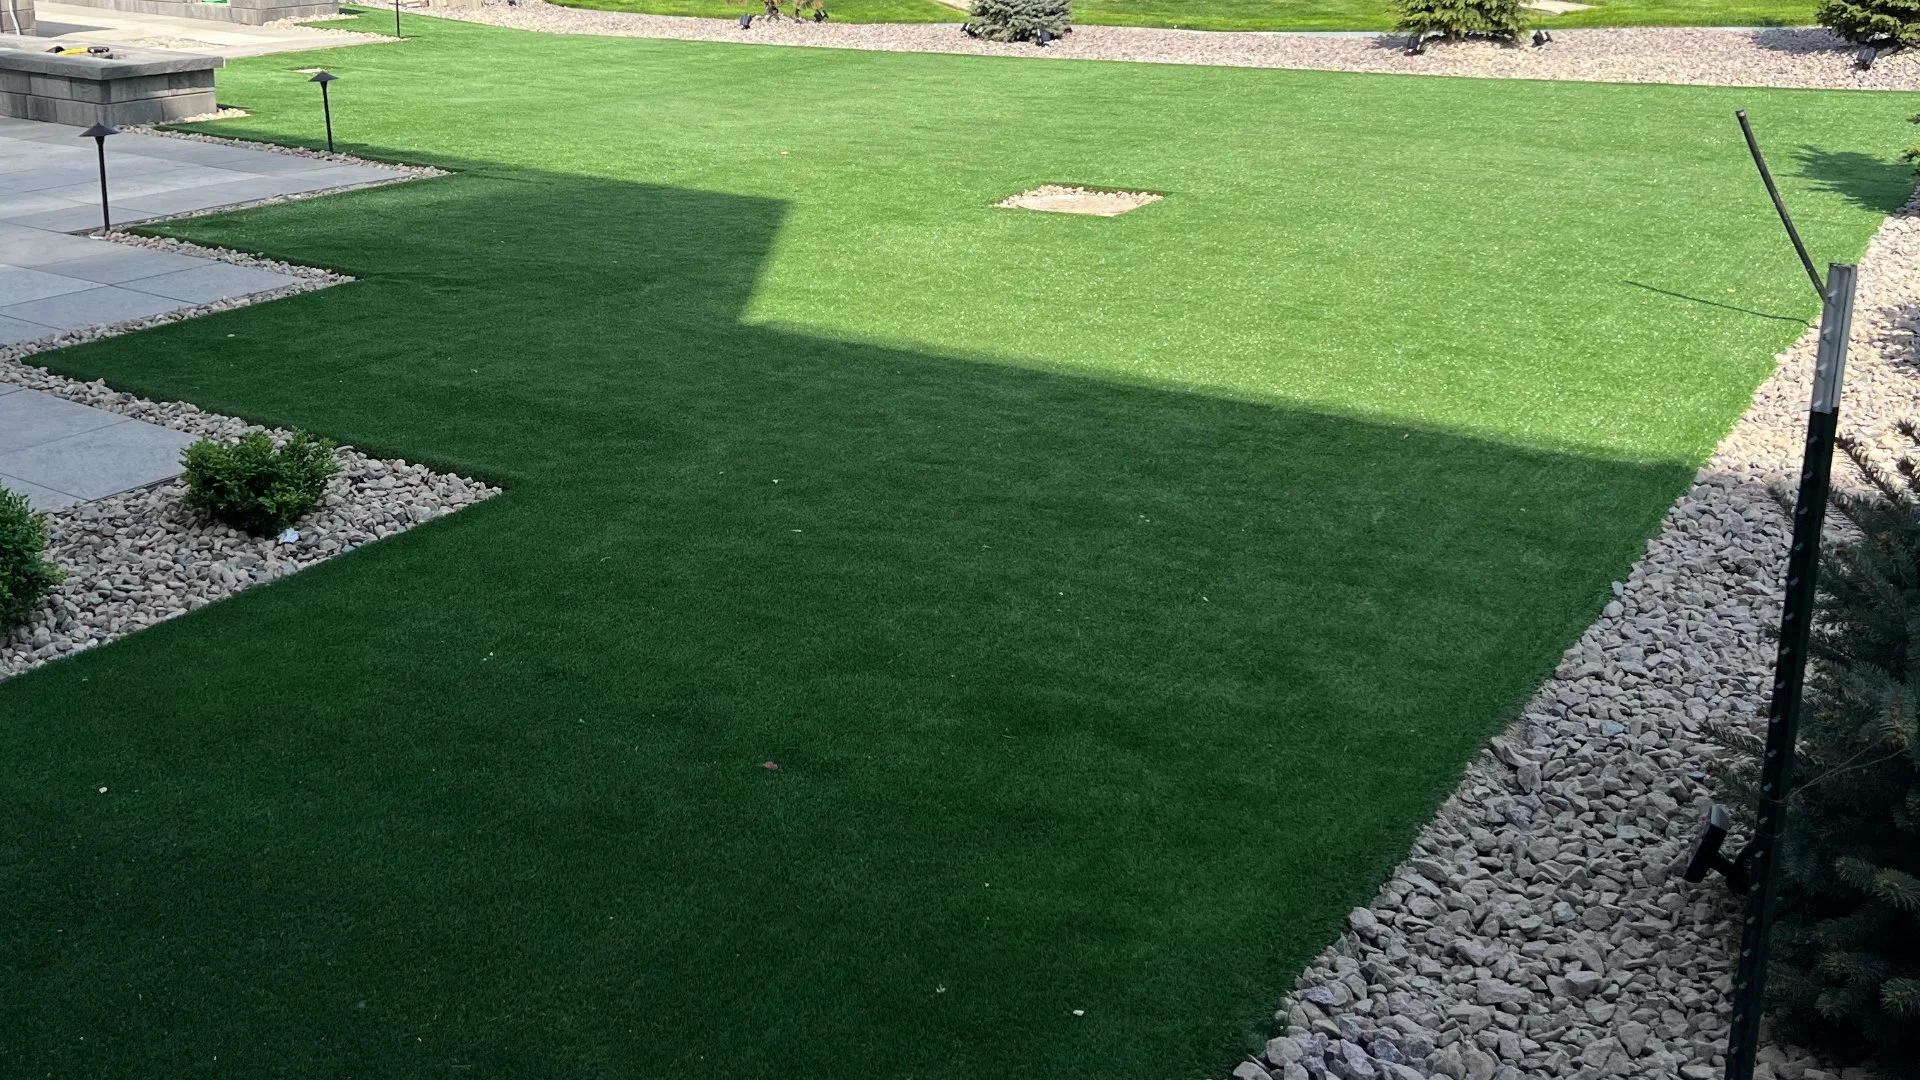 A vibrant green artificial lawn installed by our team for a client in Papillion, NE.